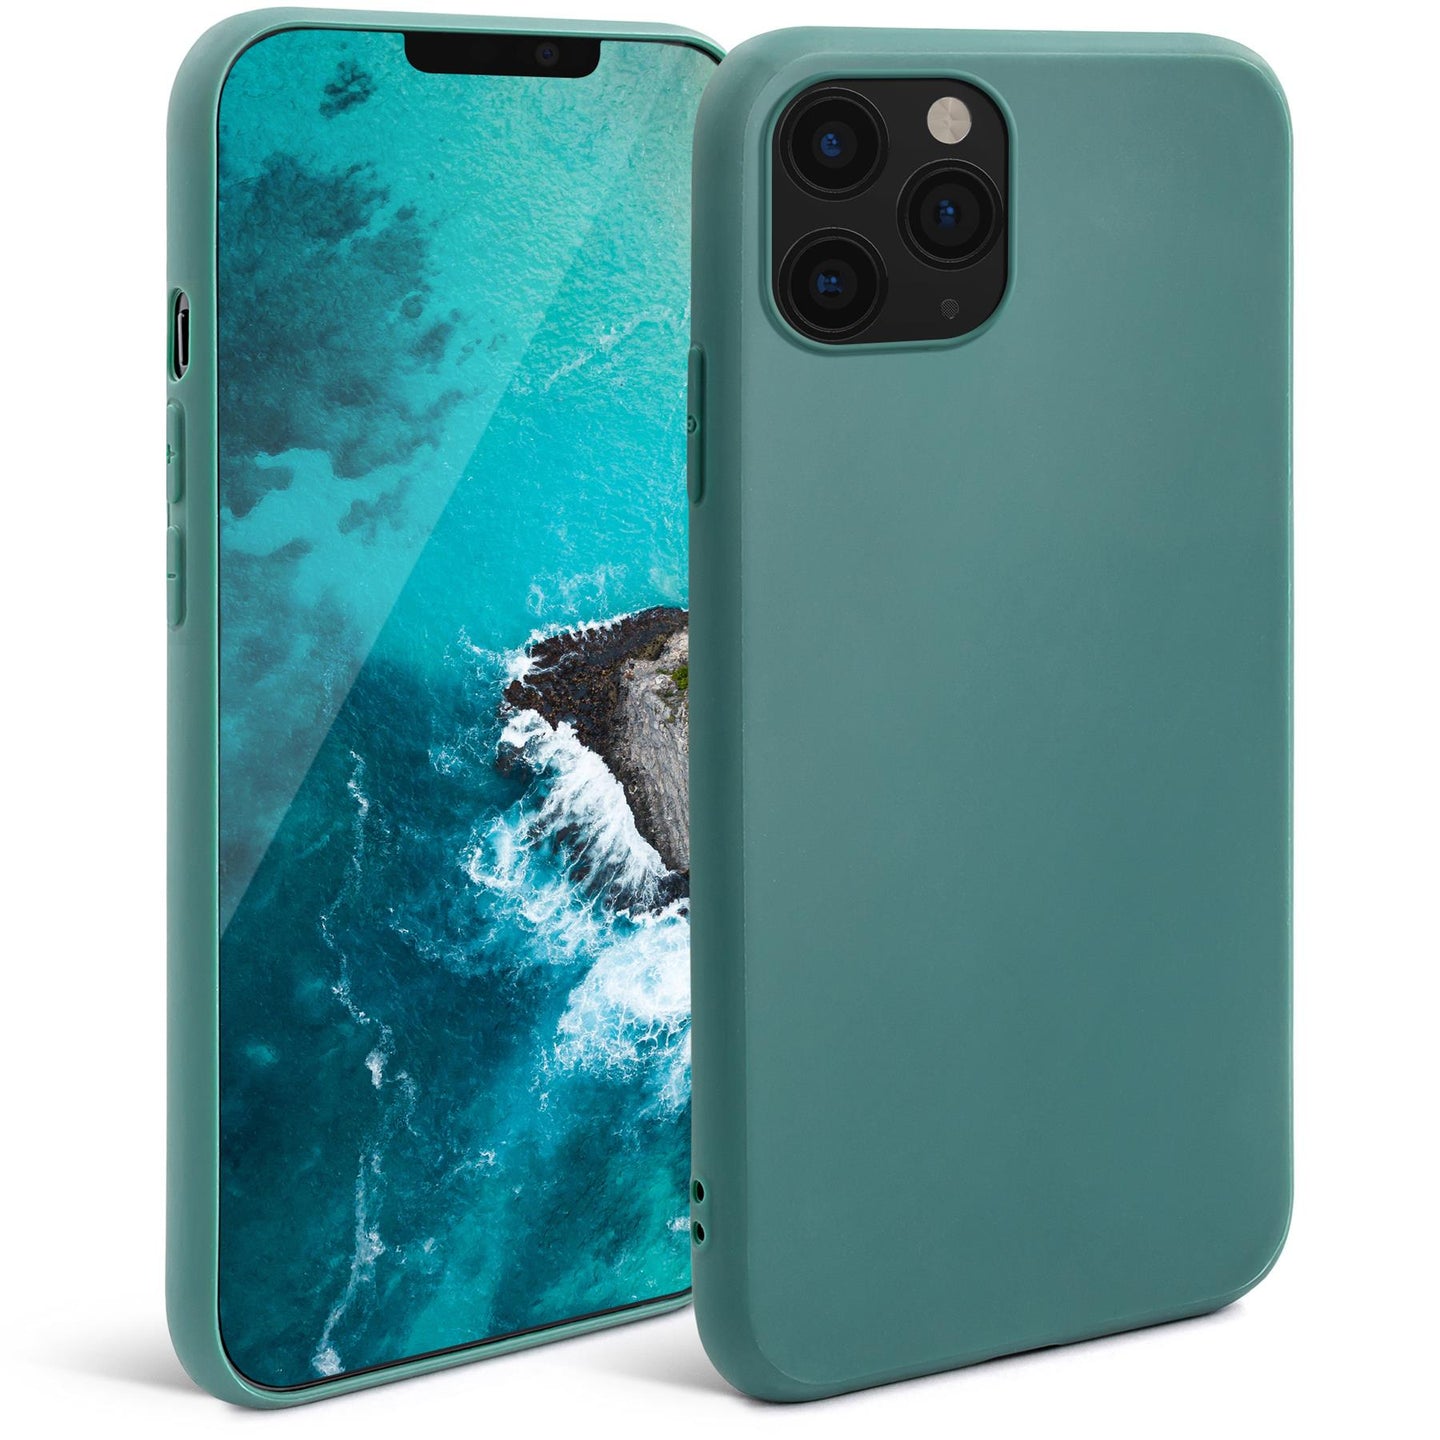 Moozy Minimalist Series Silicone Case for iPhone 11 Pro Max, Blue Grey - Matte Finish Slim Soft TPU Cover